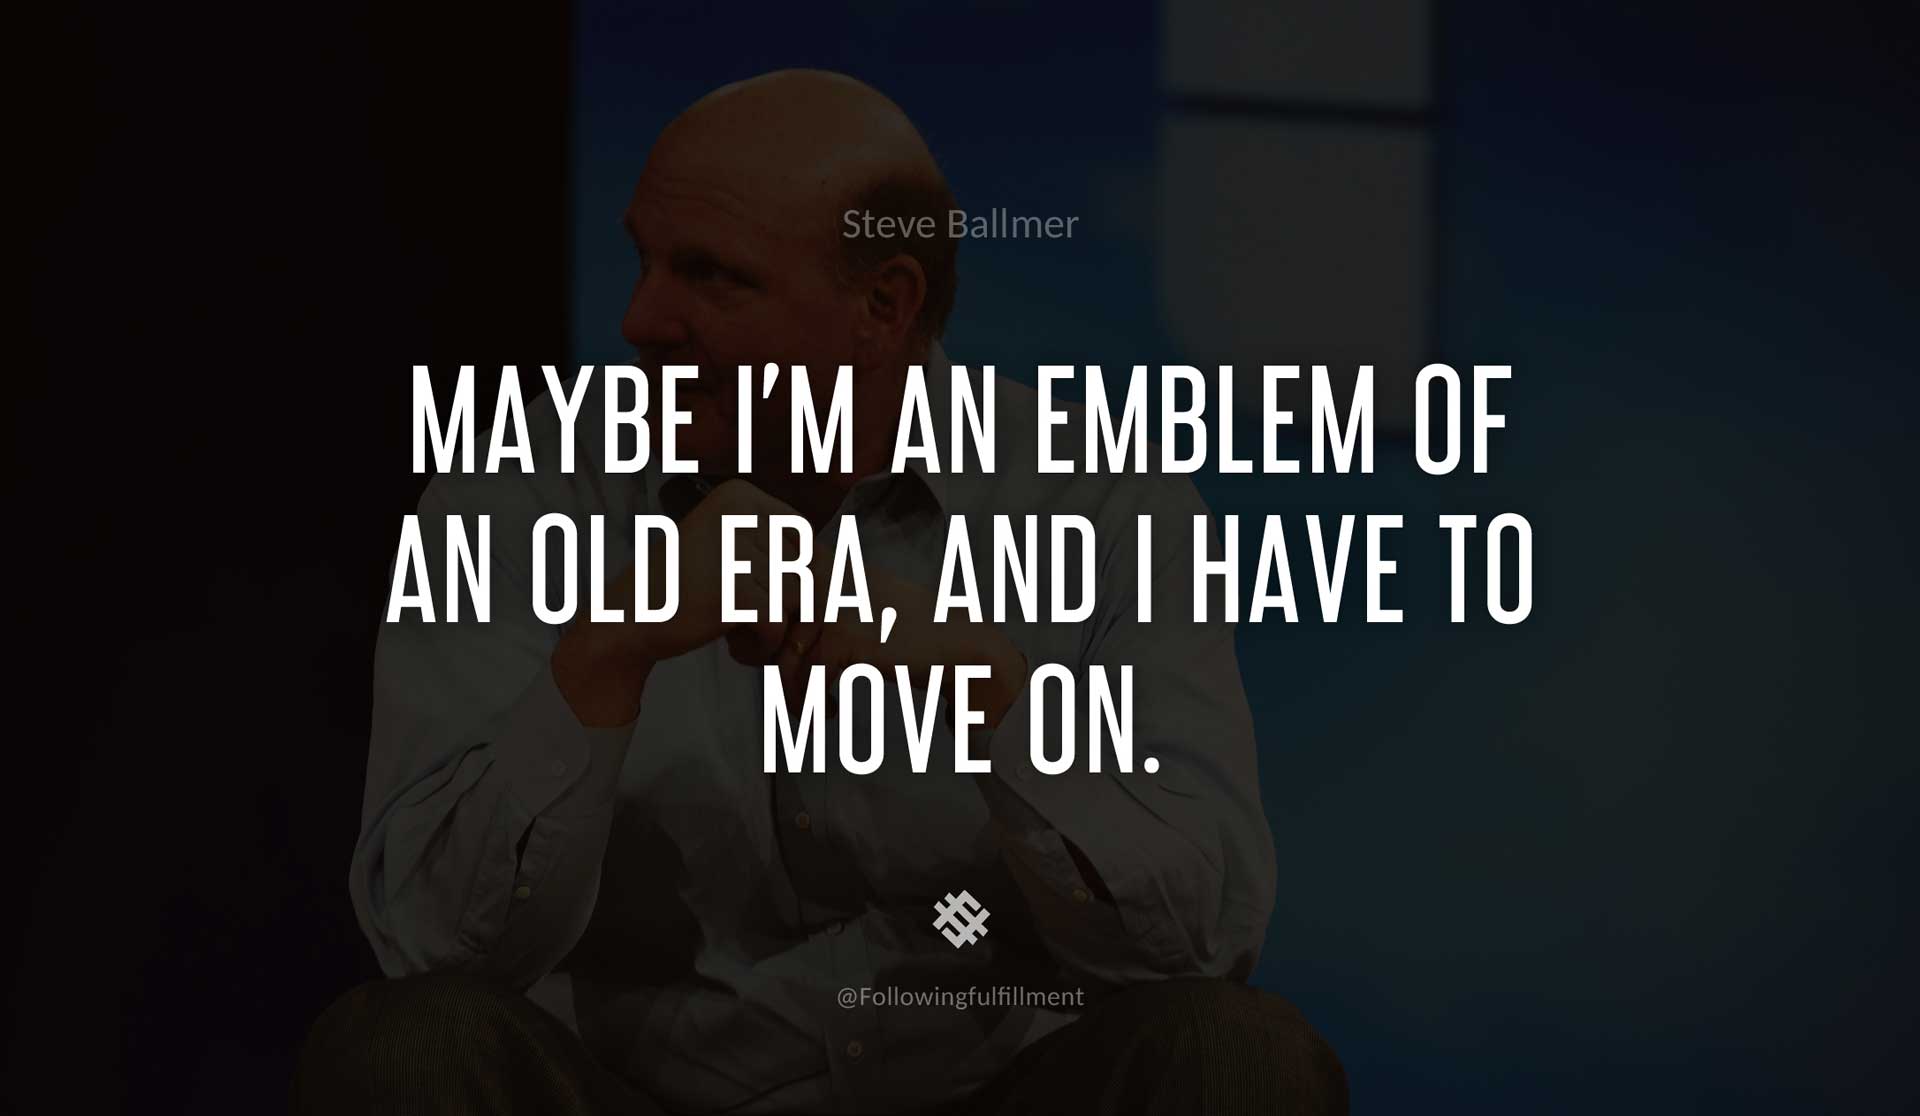 Maybe-I'm-an-emblem-of-an-old-era,-and-I-have-to-move-on.-STEVE-BALLMER-Quote.jpg